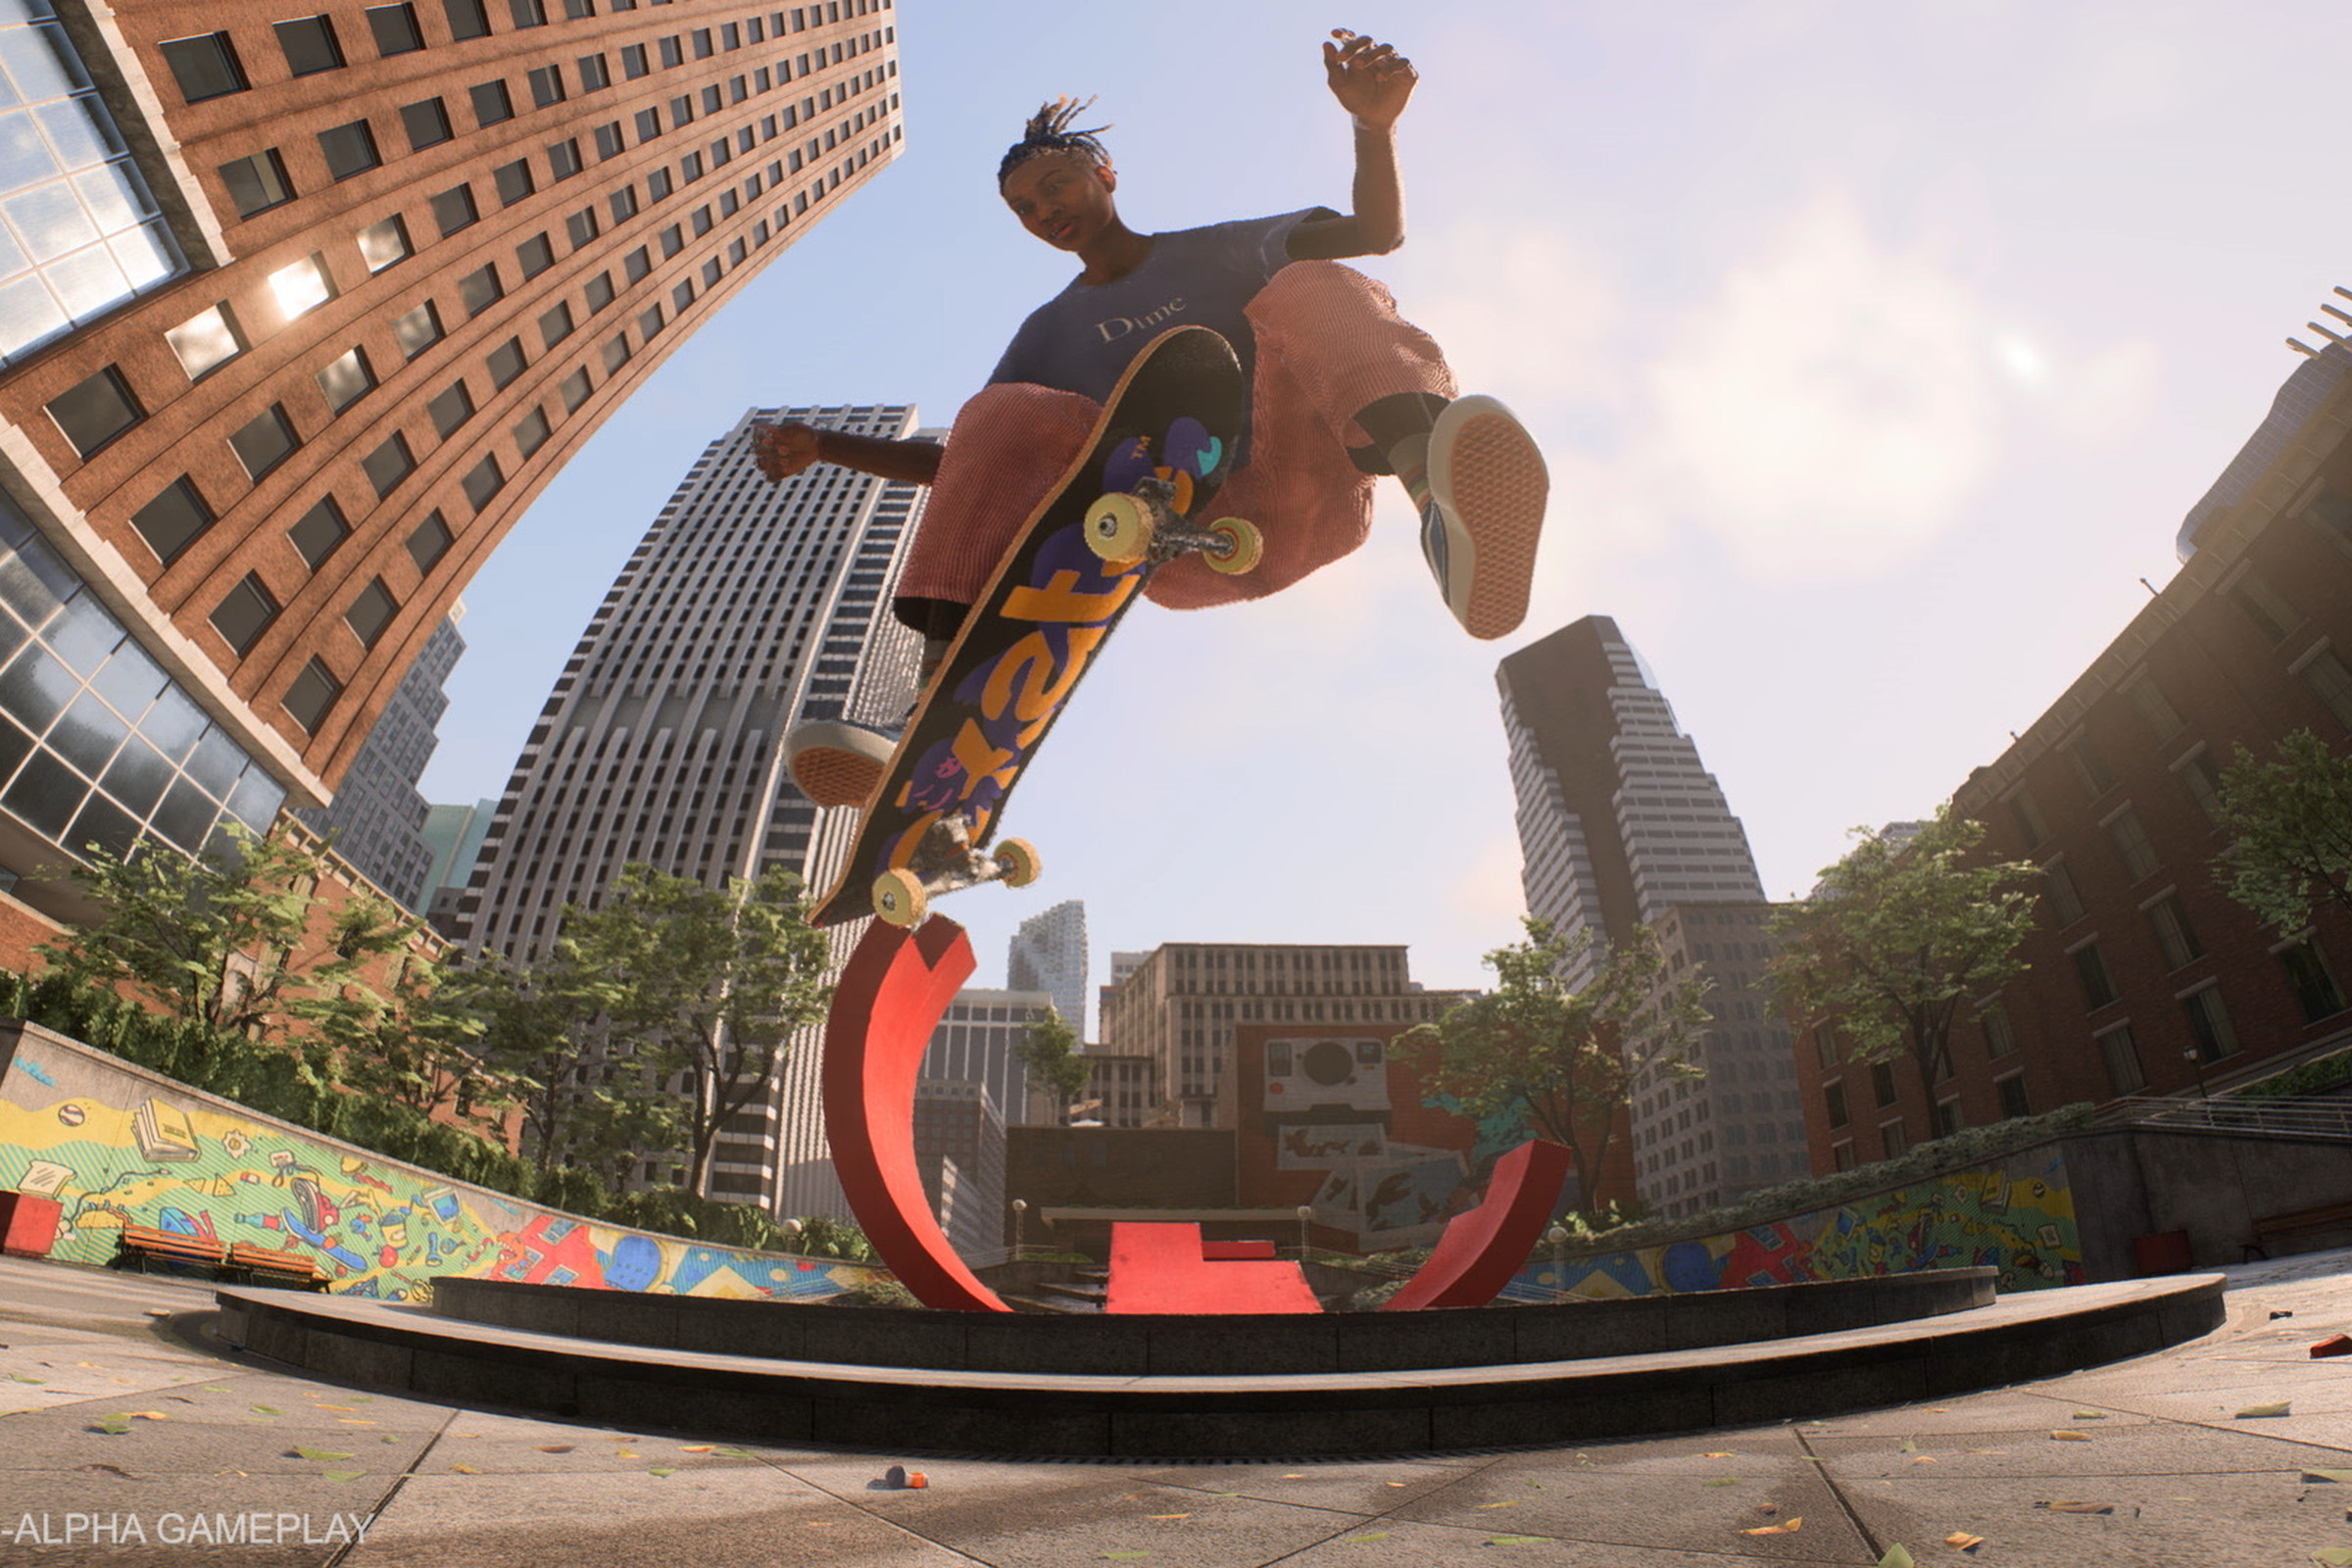 A skateboarder is doing a trick in the air in this screenshot from Skate. The camera is low to the ground and the photo looks like it is taken with a fish eye lens.